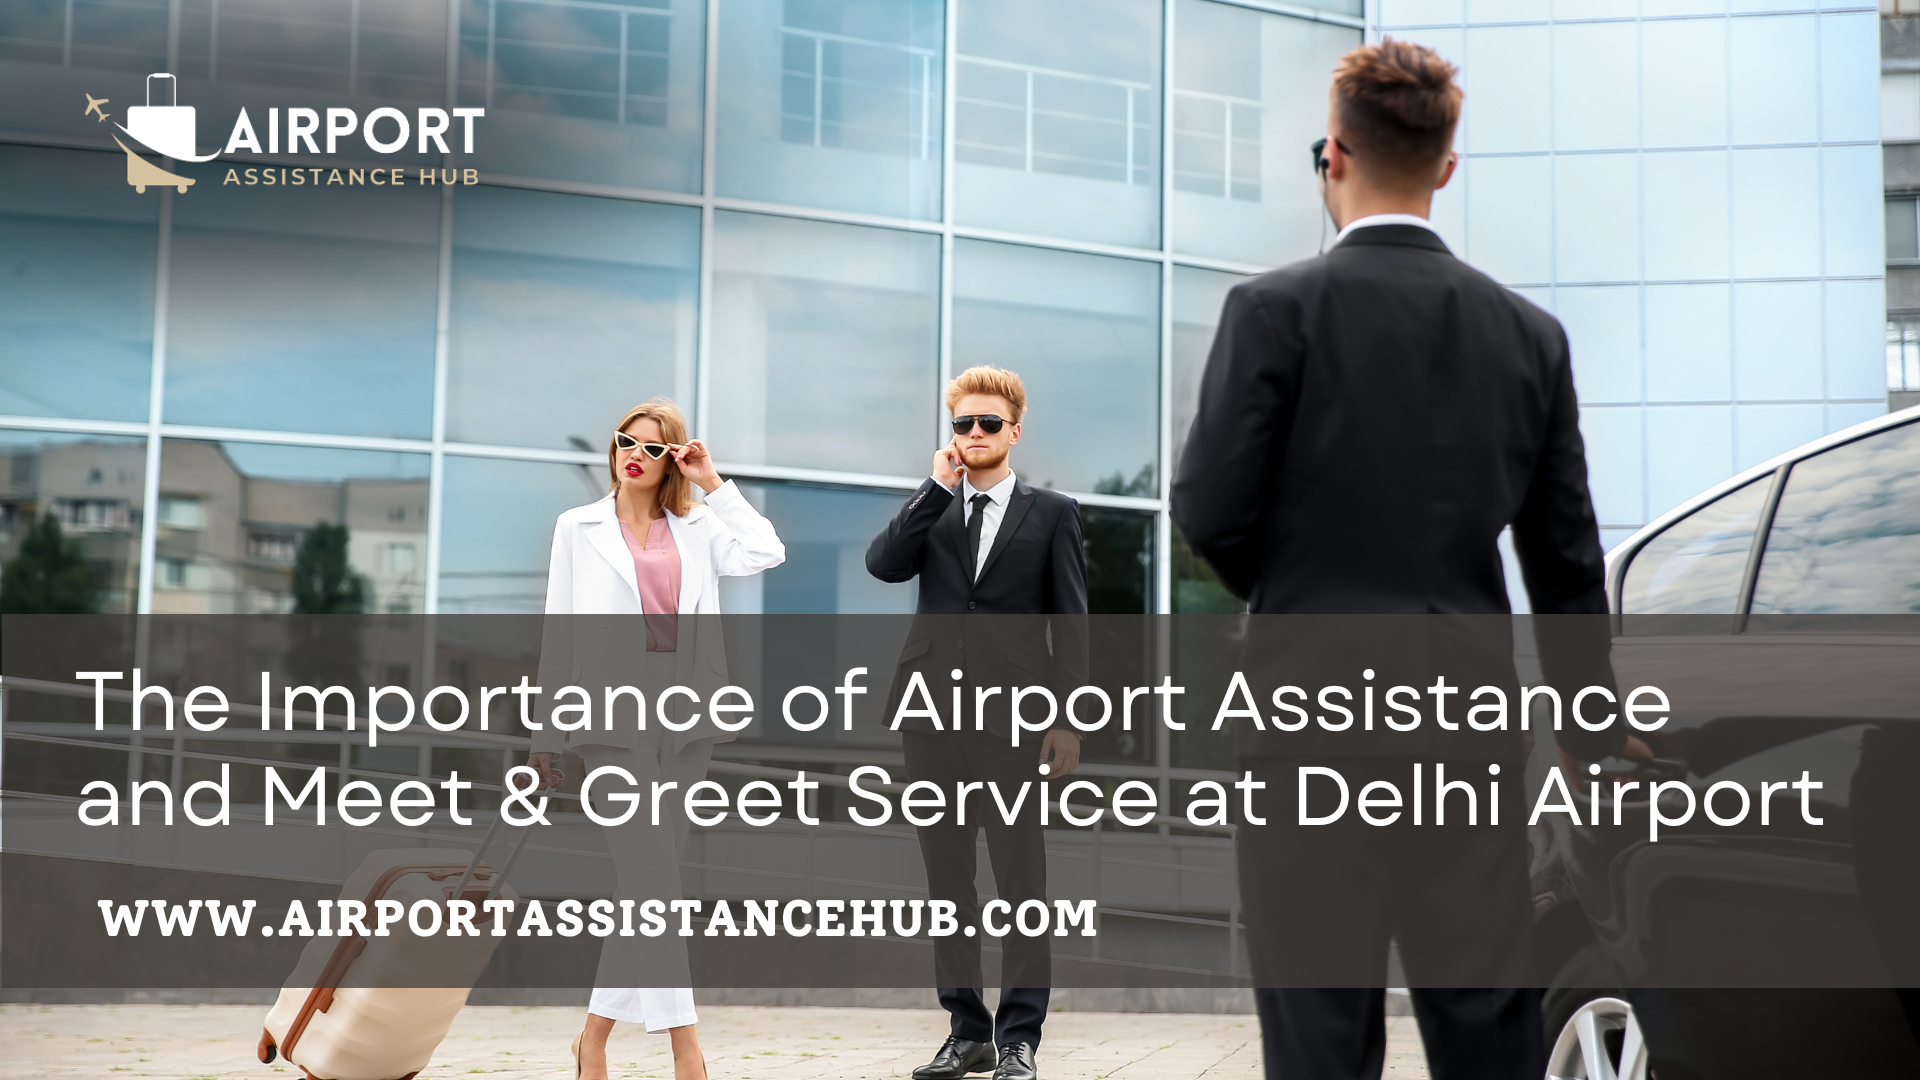 The Importance of Airport Assistance and Meet & Greet Service at Delhi Airport